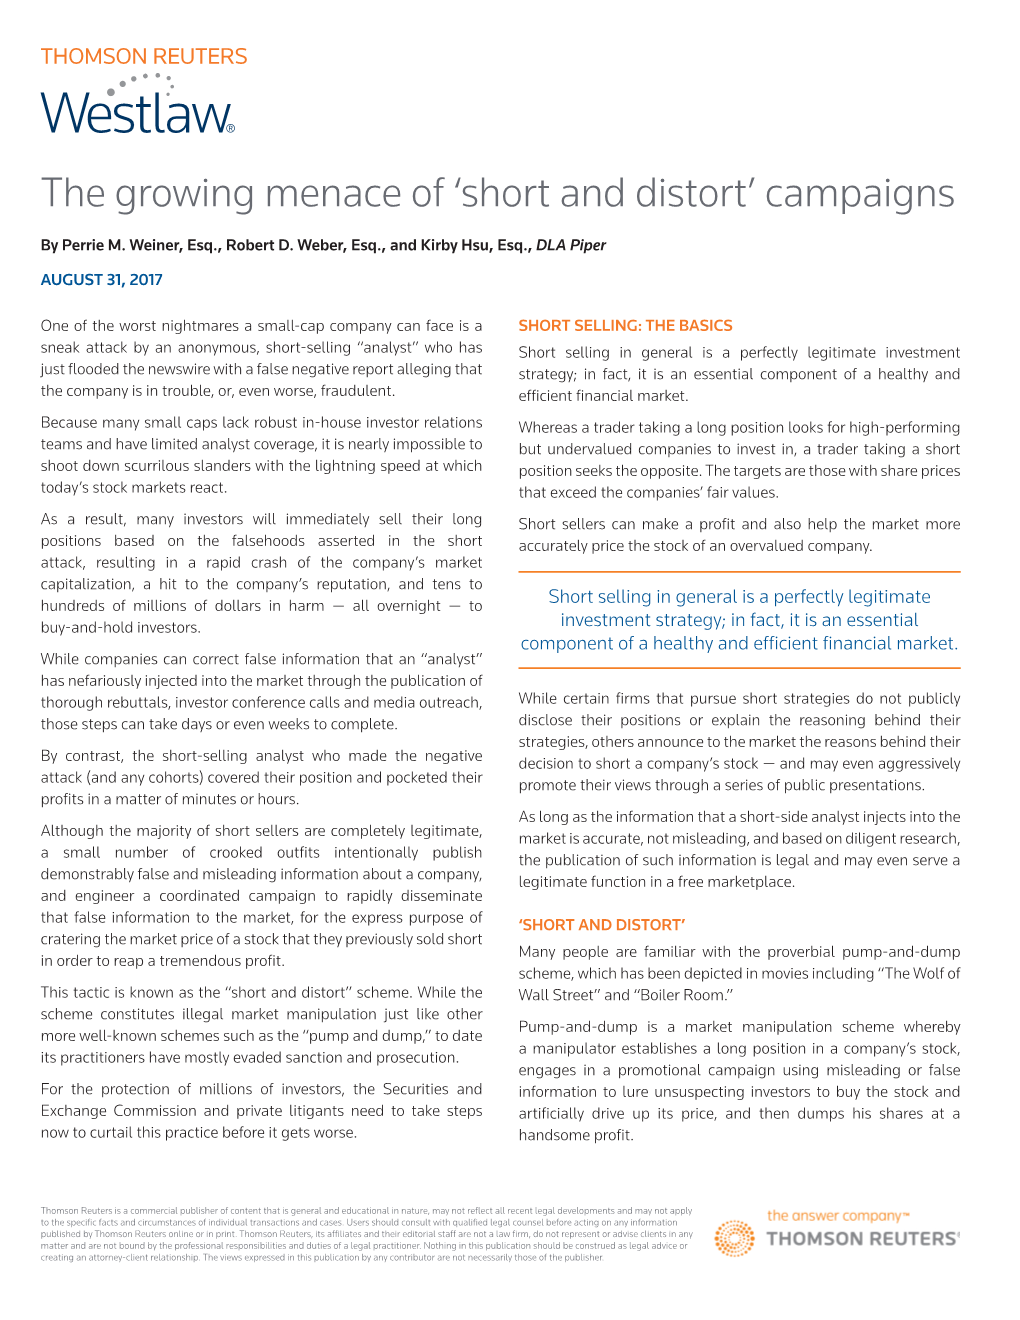 The Growing Menace of 'Short and Distort' Campaigns